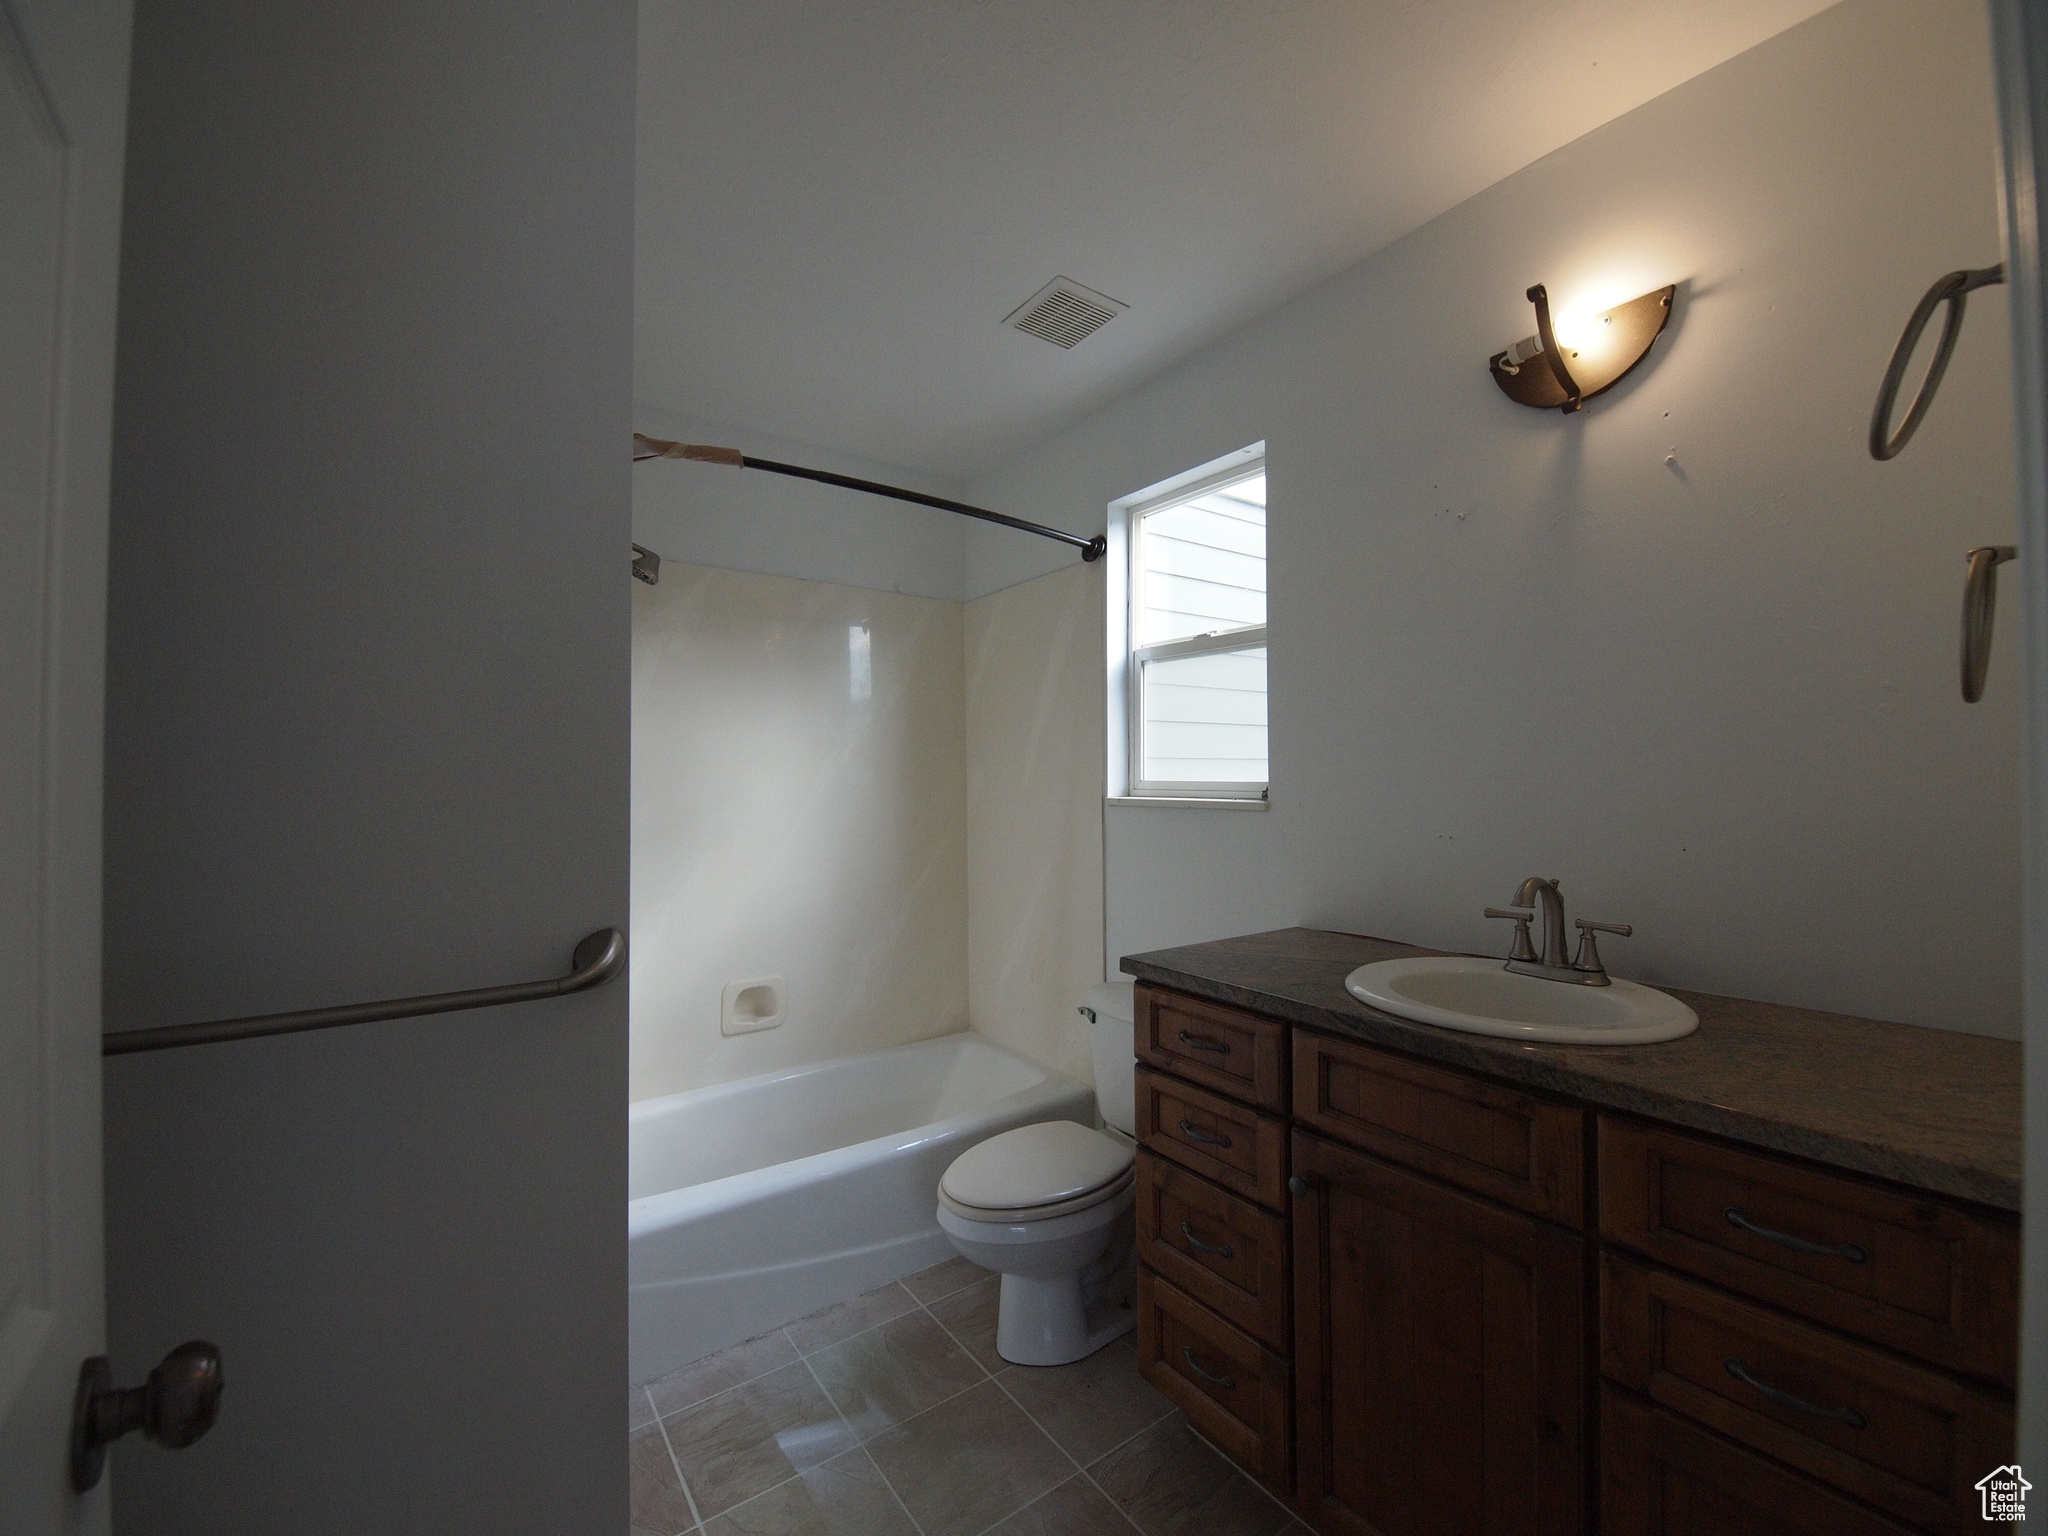 Upstairs  full primary bathroom with tile floors, tub / shower combination, vanity, and toilet